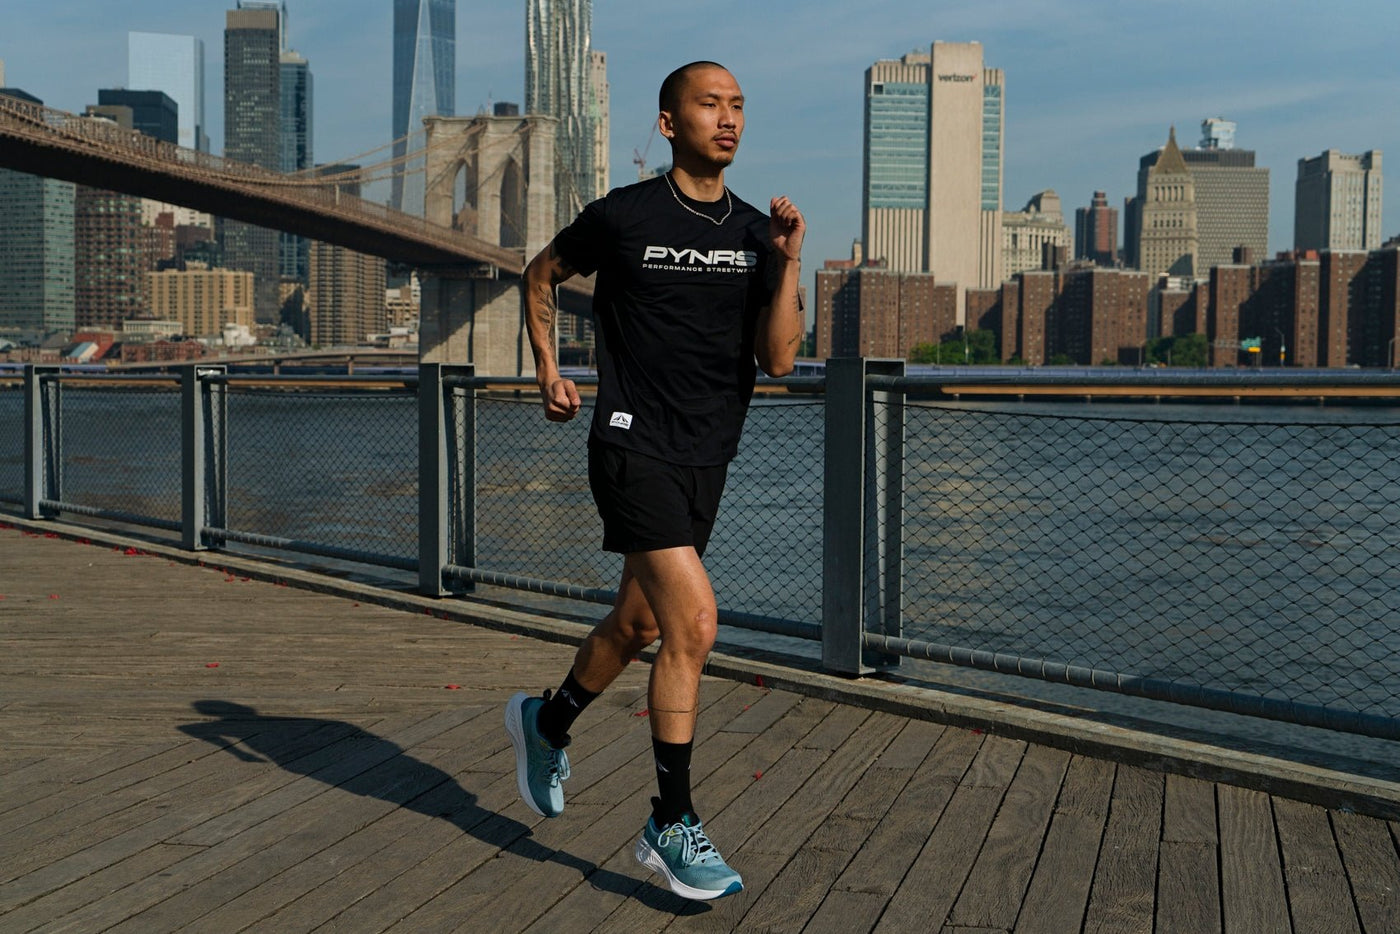 Why Breathable Fabrics are Essential for a Comfortable Running Experience - PYNRS Performance Streetwear